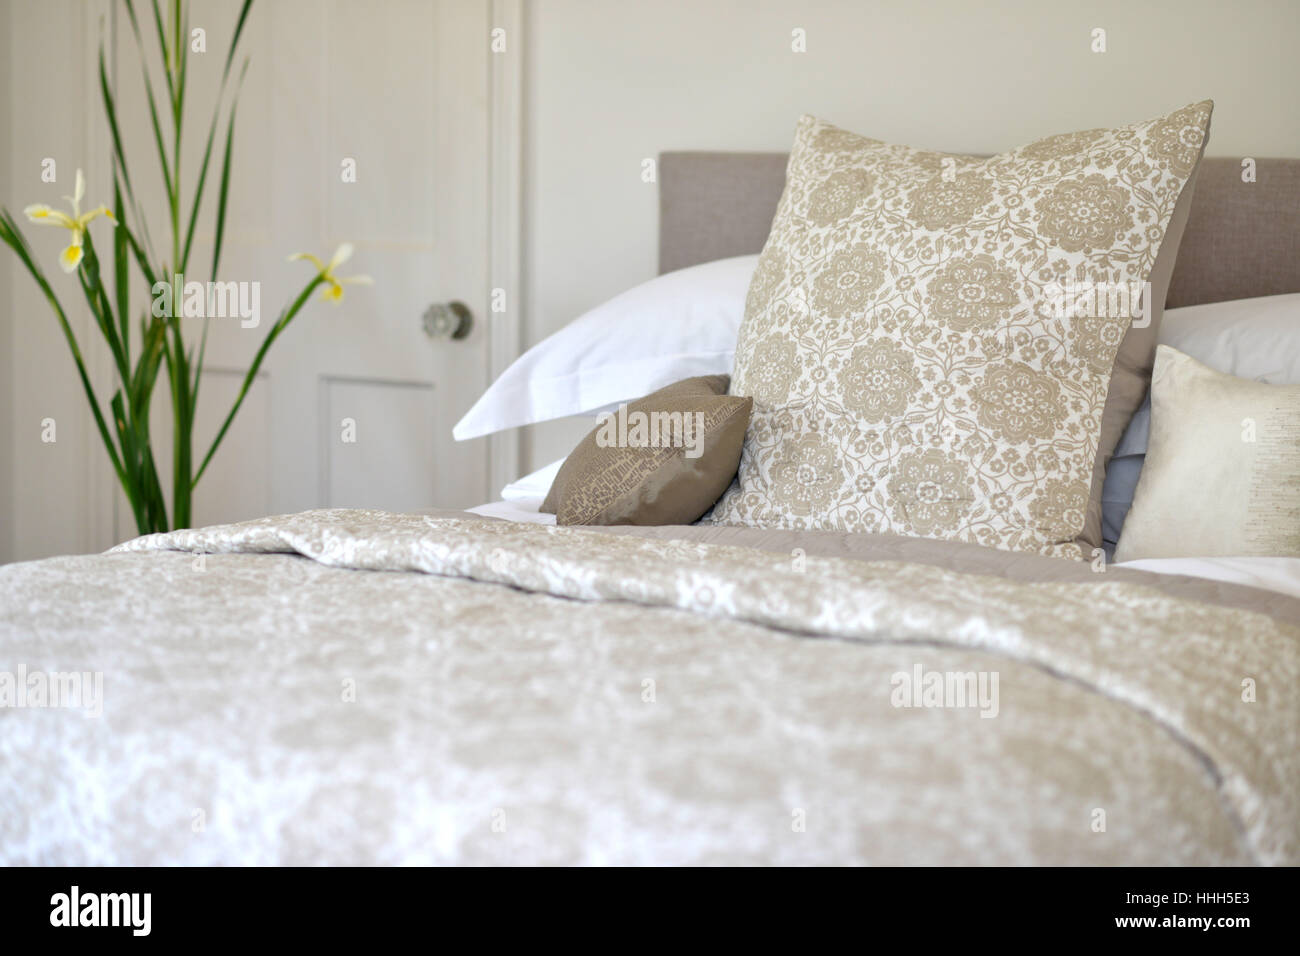 Bed in bedroom setting with luxury bedspread Stock Photo